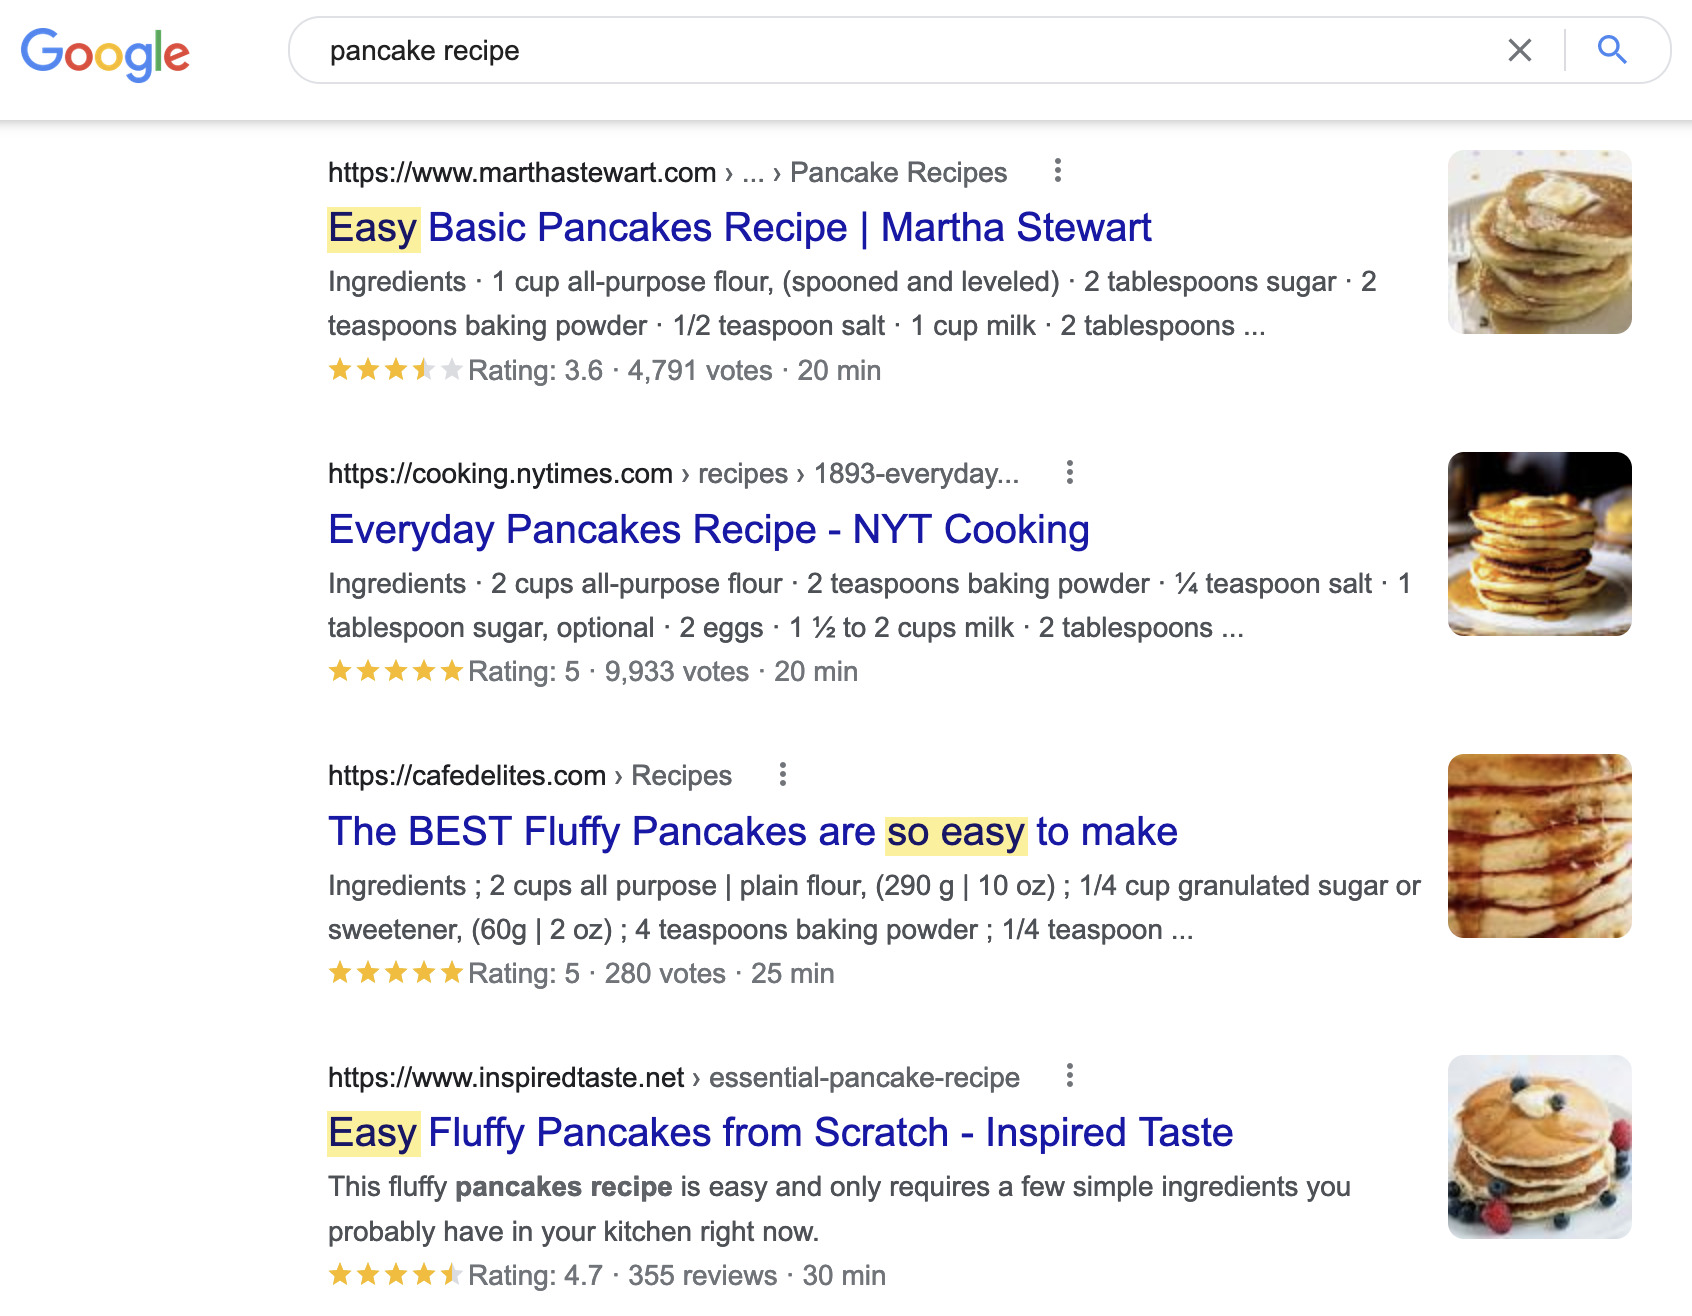 People searching for "pancake recipe" clearly want a blog post with an easy recipe
